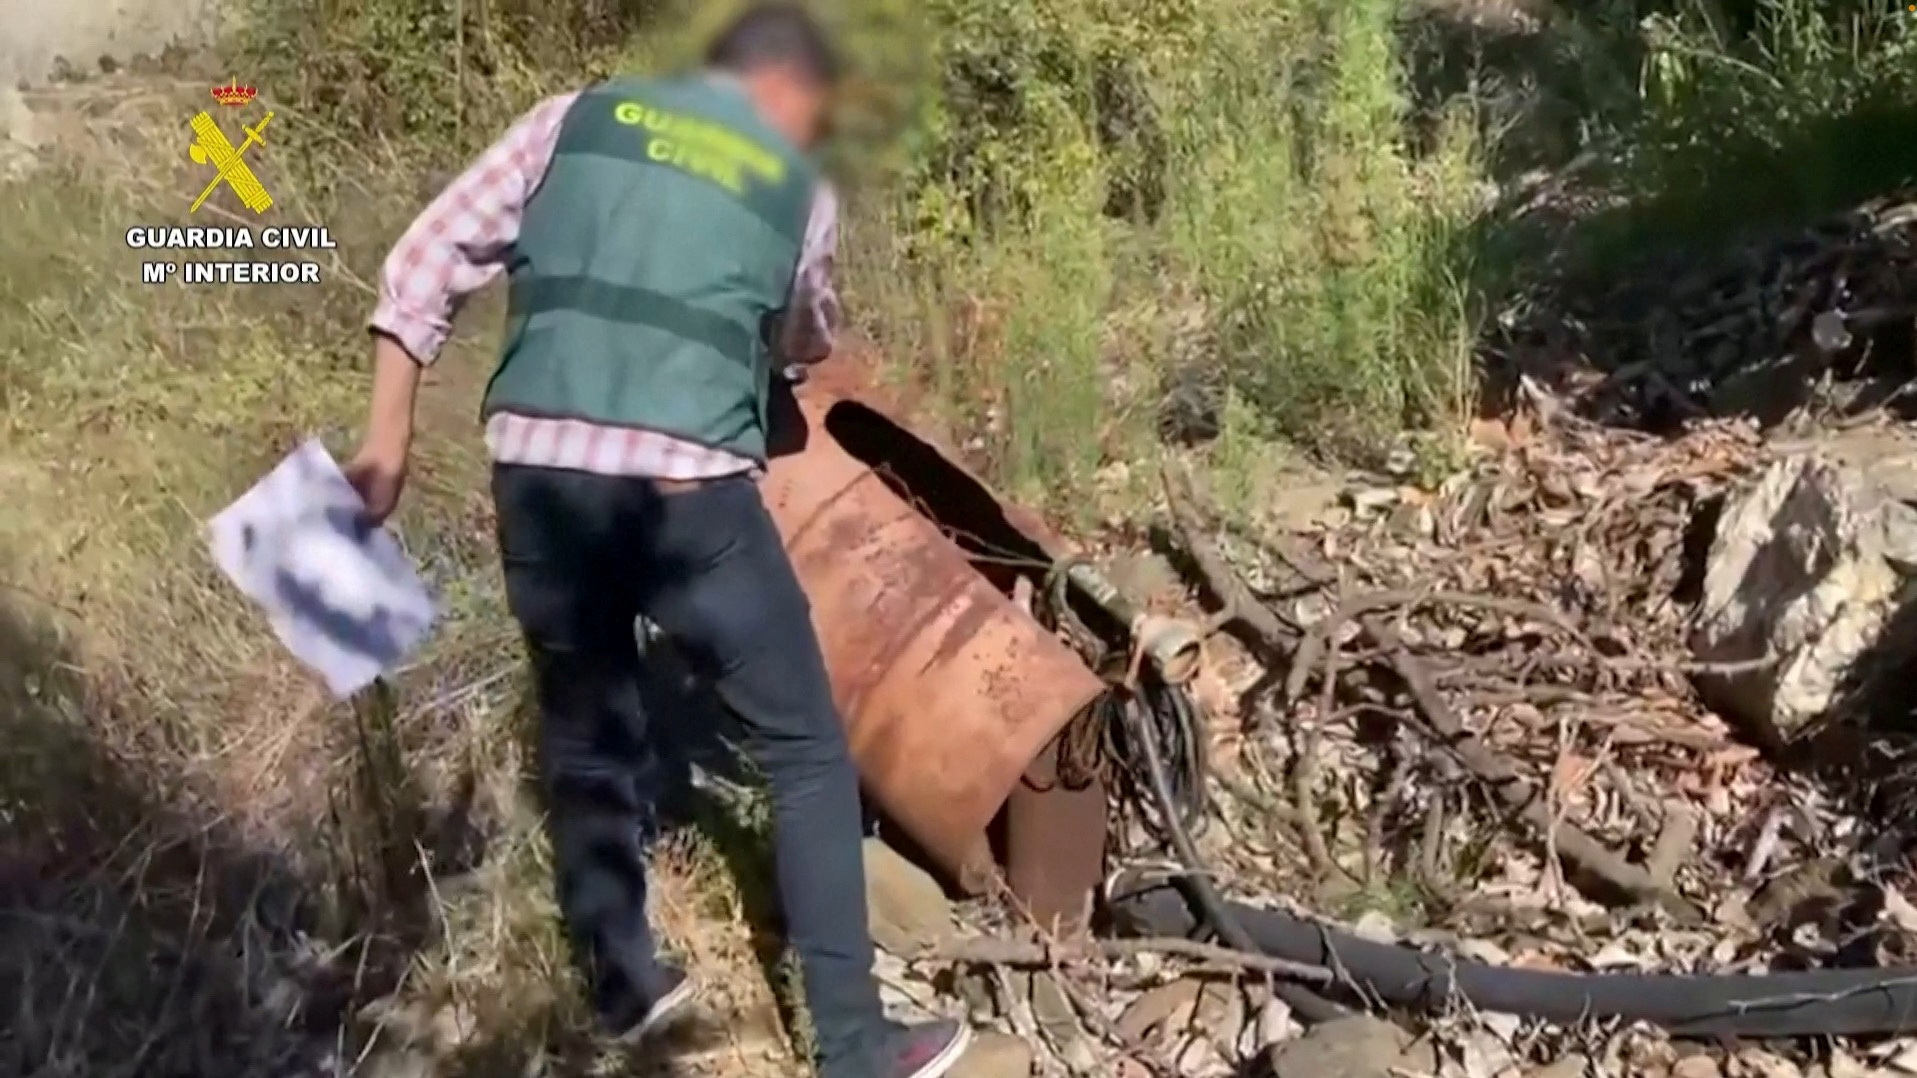 A Spanish police officer uncovers an illegal well in Malaga province